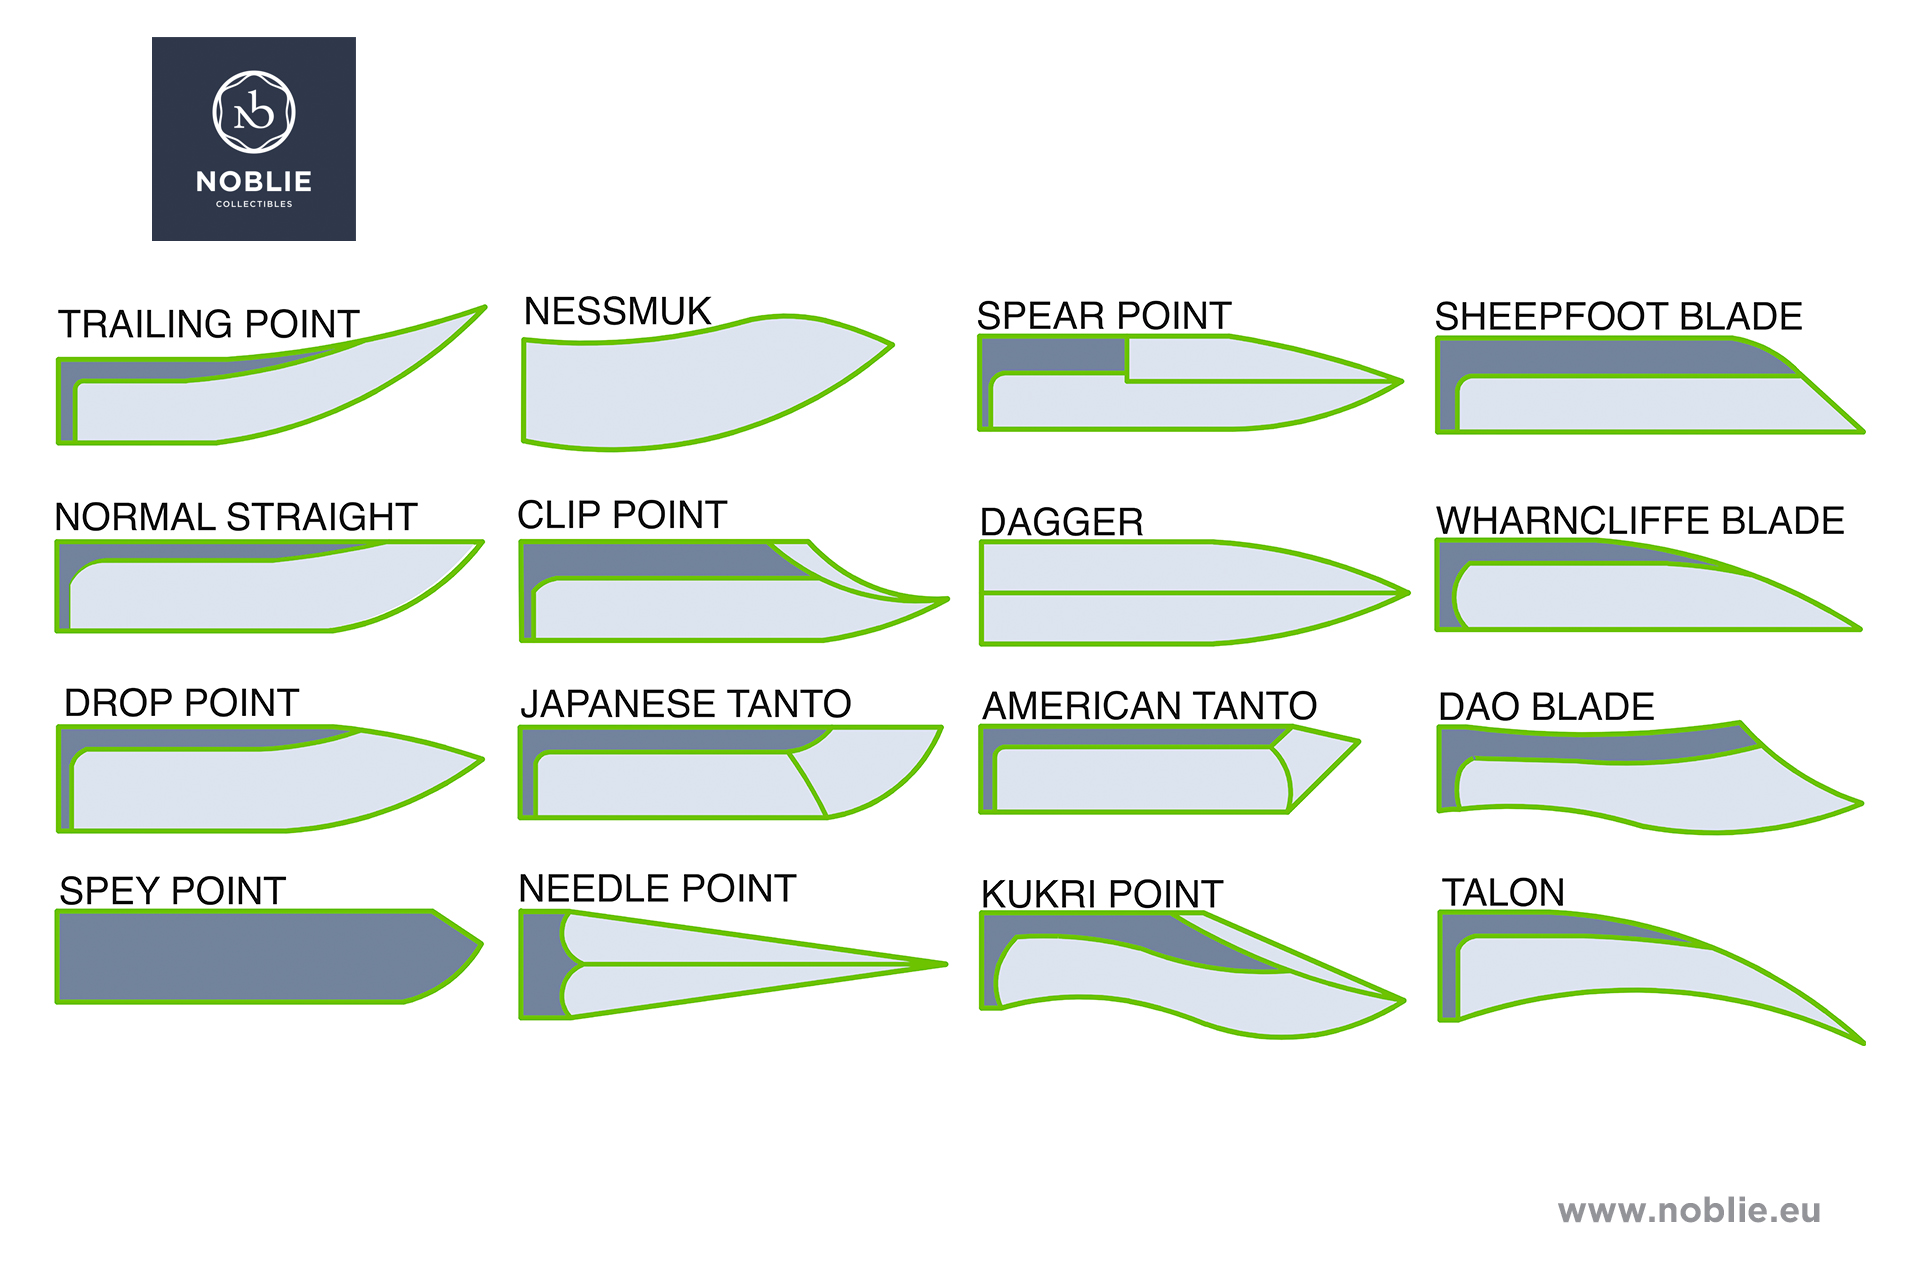 Shapes and types of blades